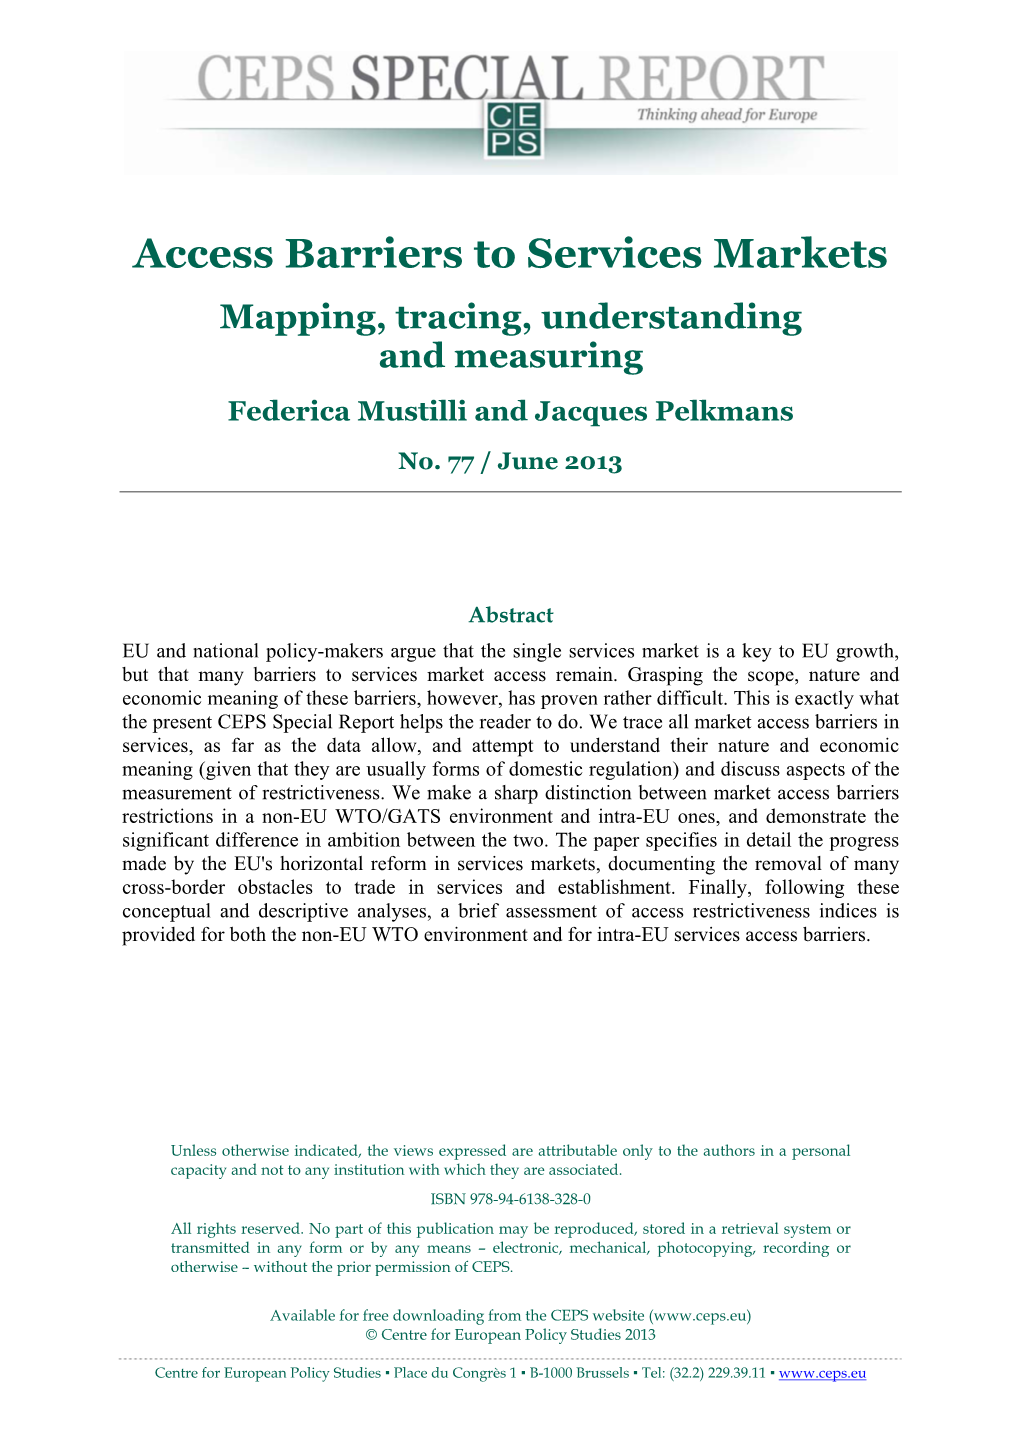 Access Barriers to Services Markets Mapping, Tracing, Understanding and Measuring Federica Mustilli and Jacques Pelkmans